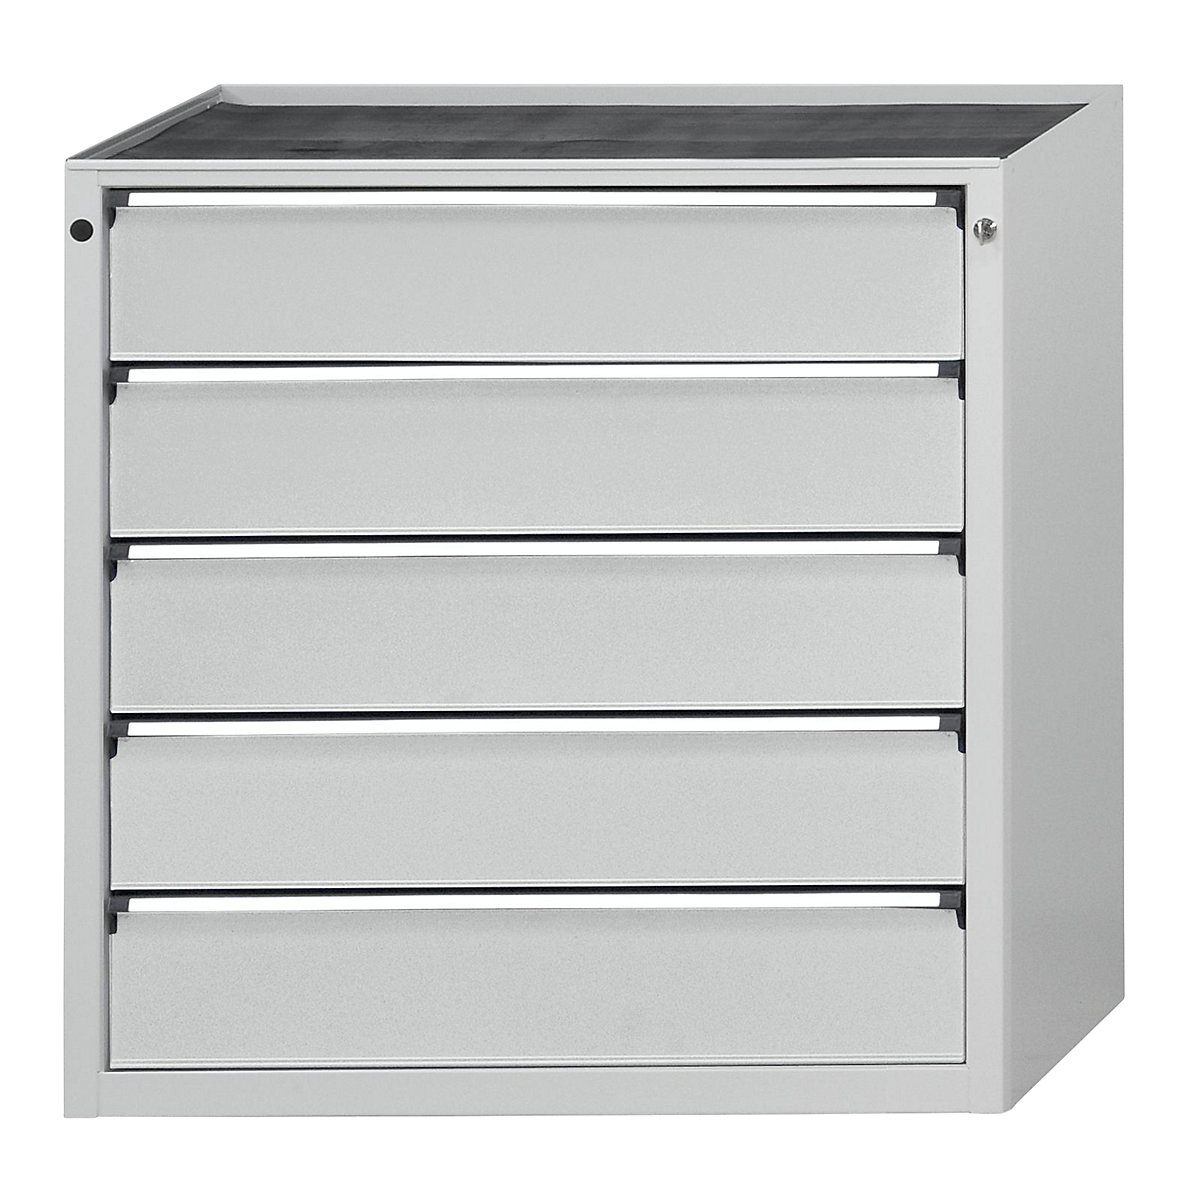 Drawer cupboard – ANKE, WxD 910 x 675 mm, 5 drawers, height 980 mm, front in light grey-9